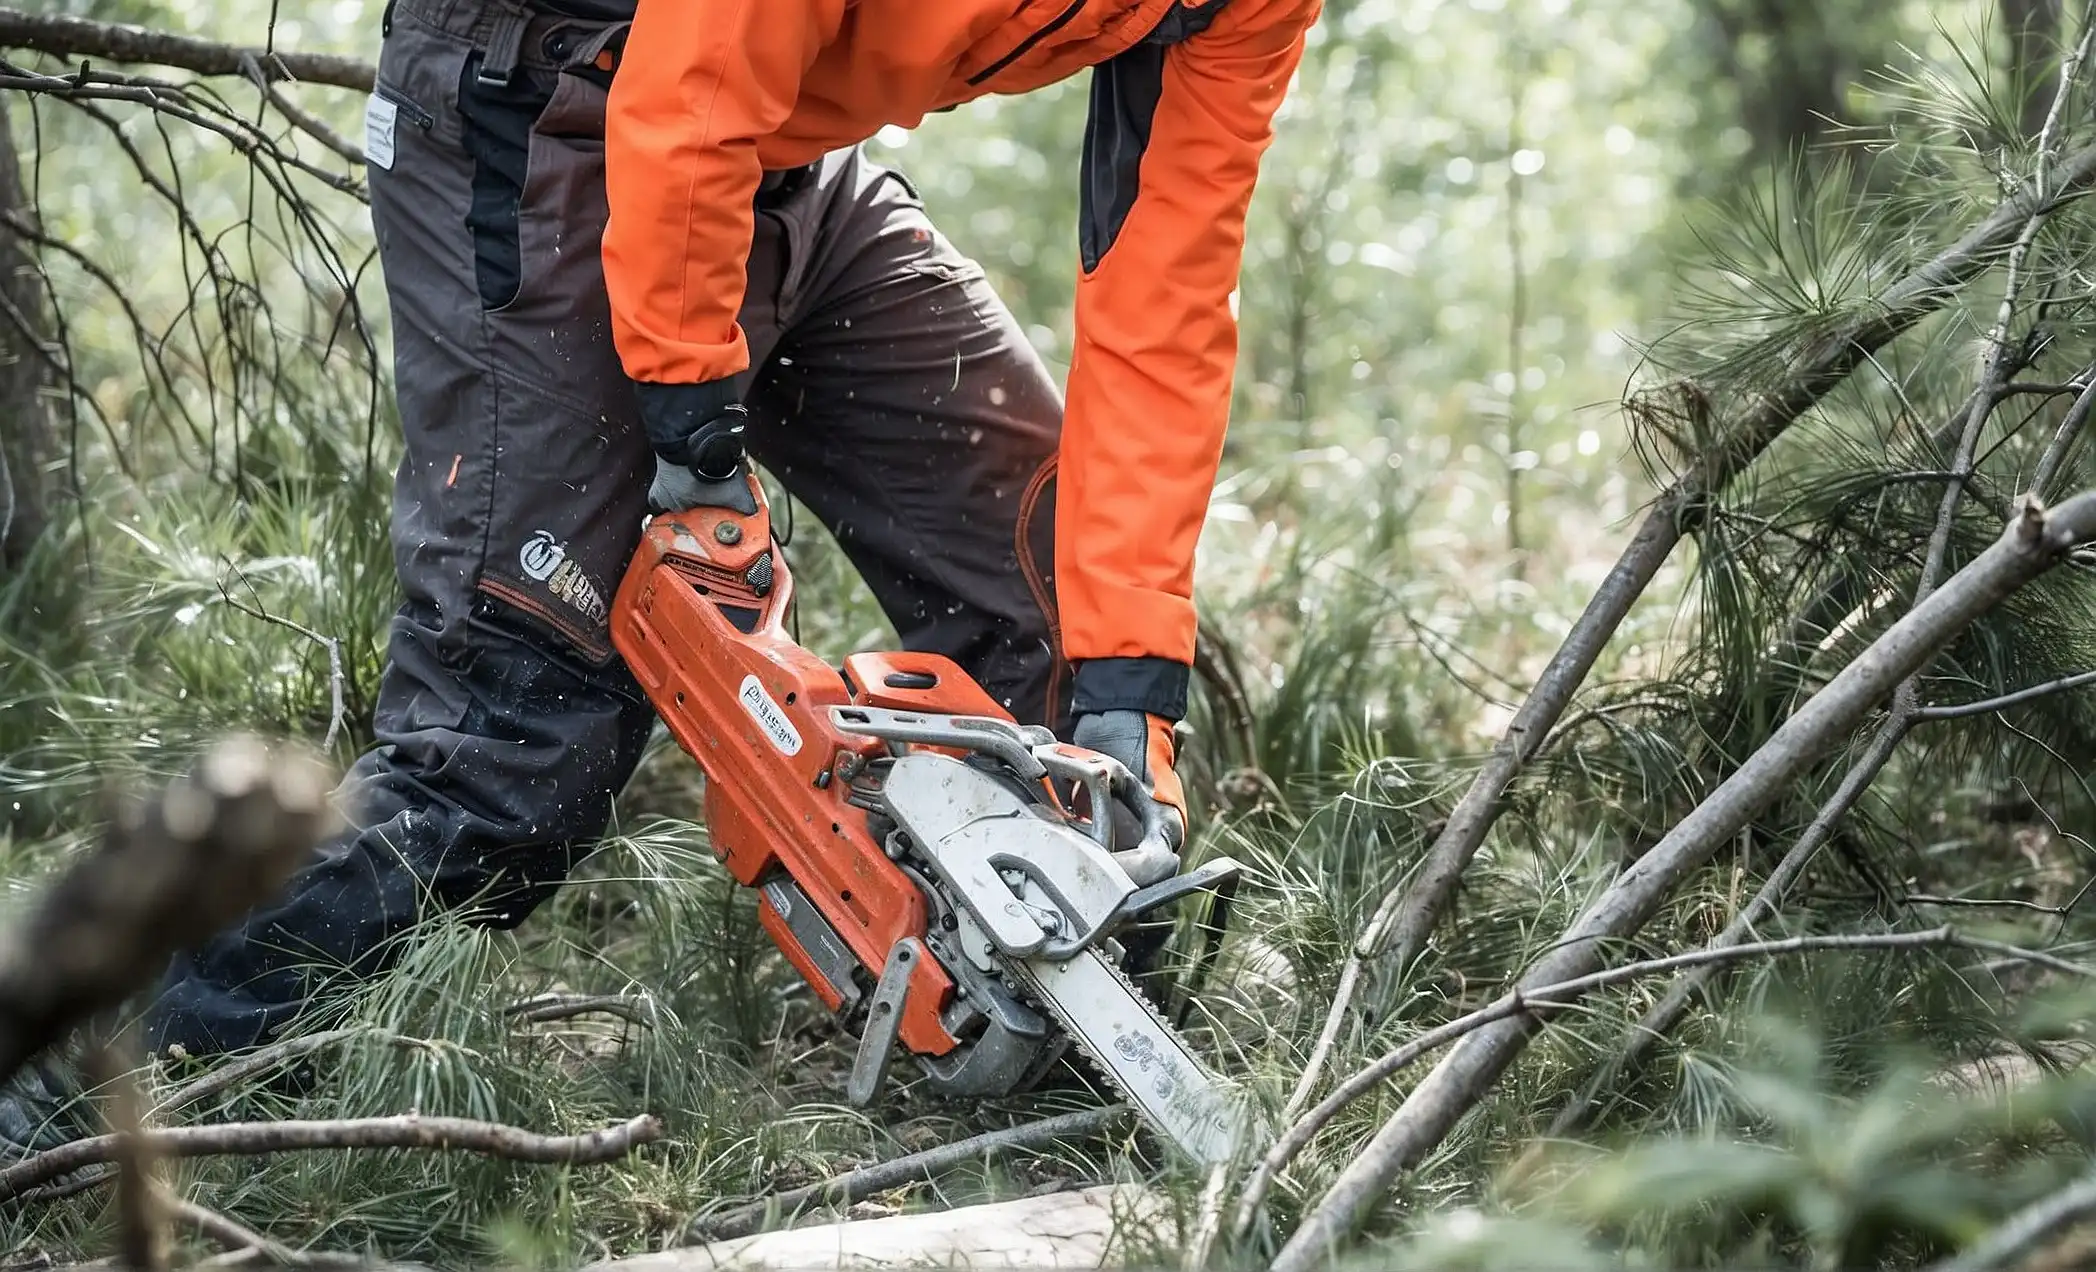 How Can You Use a Chainsaw on Wet Wood